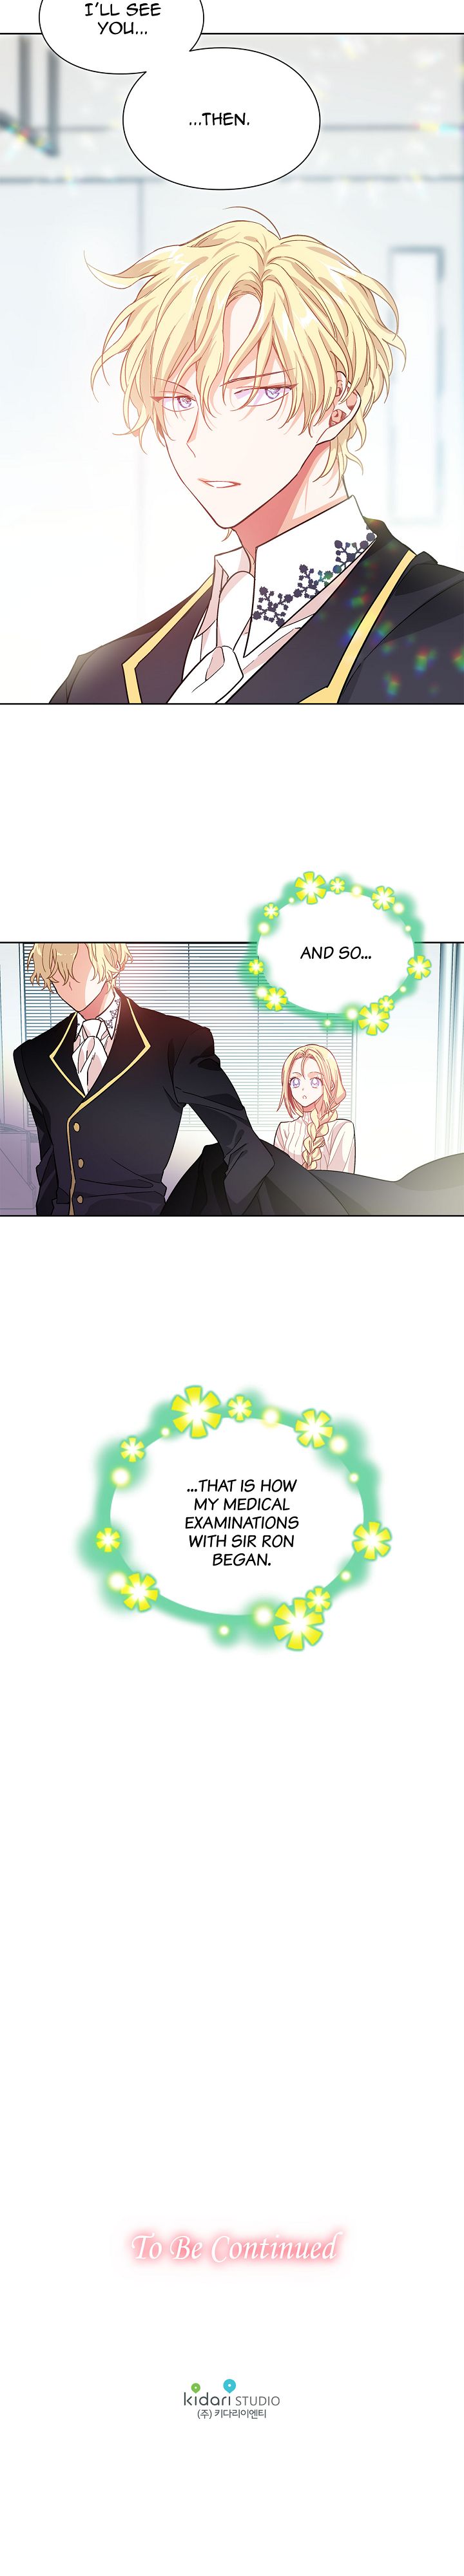 Doctor Elise – The Royal Lady with the Lamp - Chapter 27 Page 15